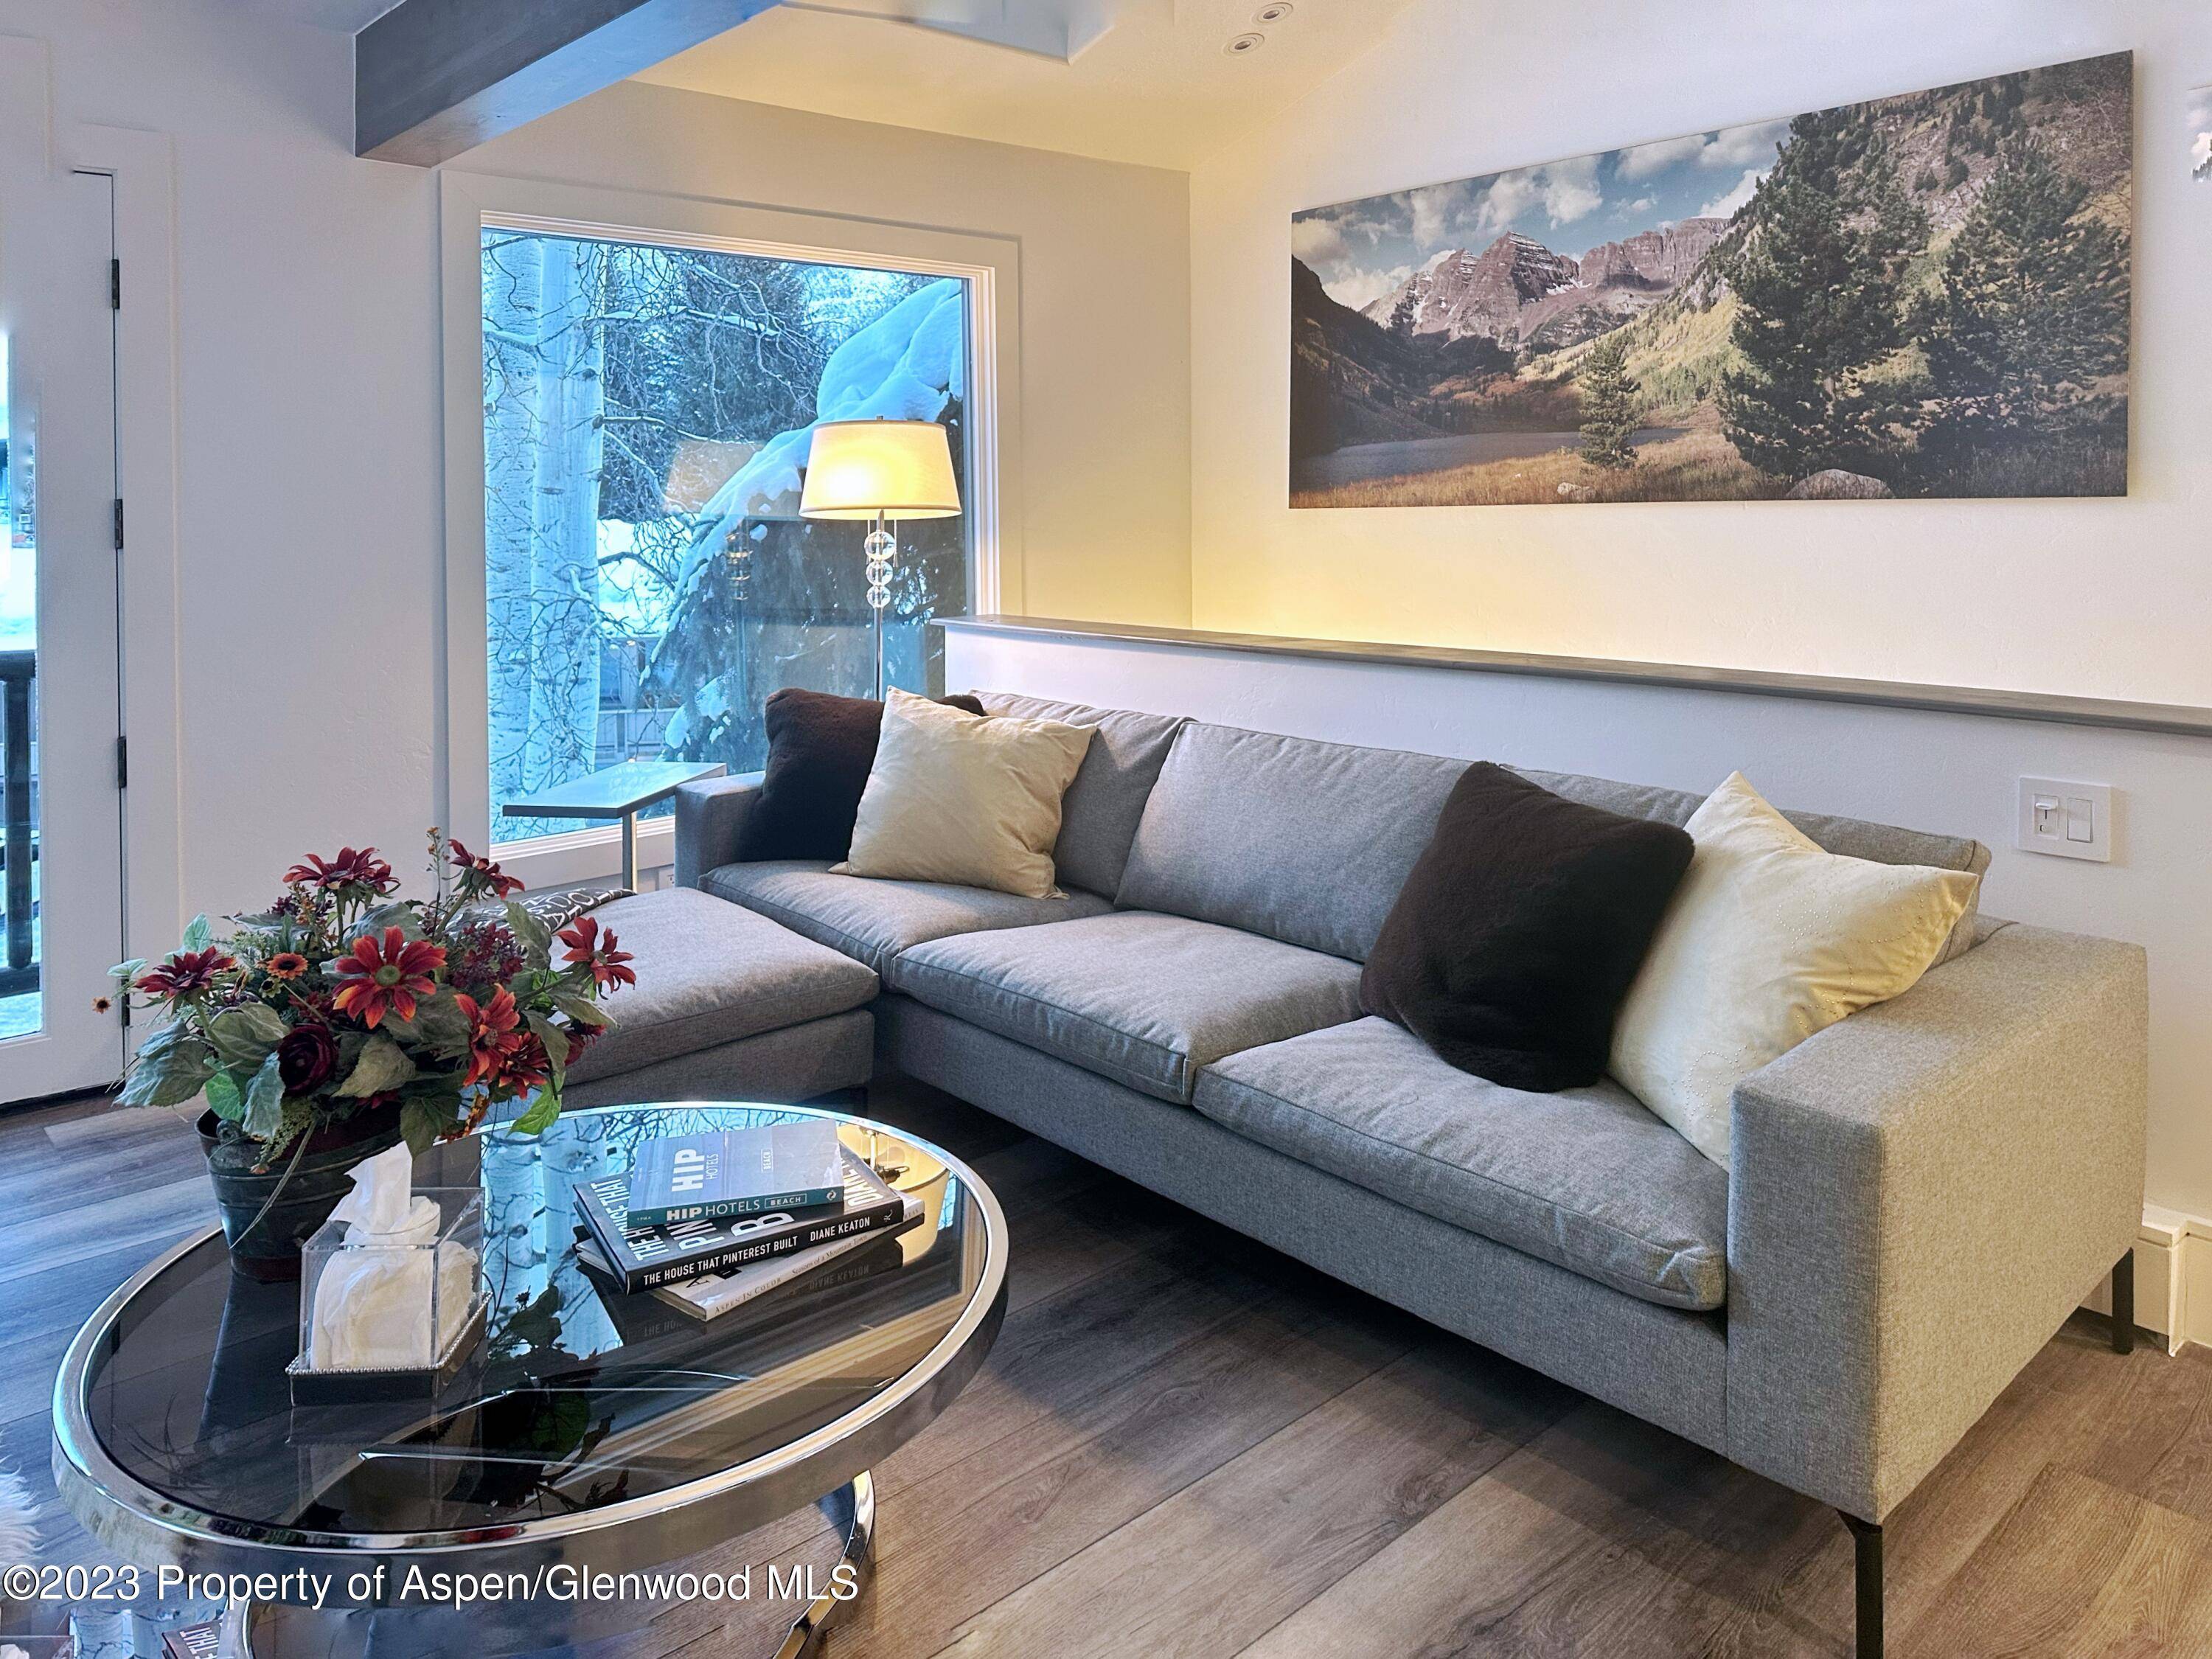 This charming 2 bedroom condominium in Aspen offers ski in access from Little Nell ski run and stunning Red Mountain views.